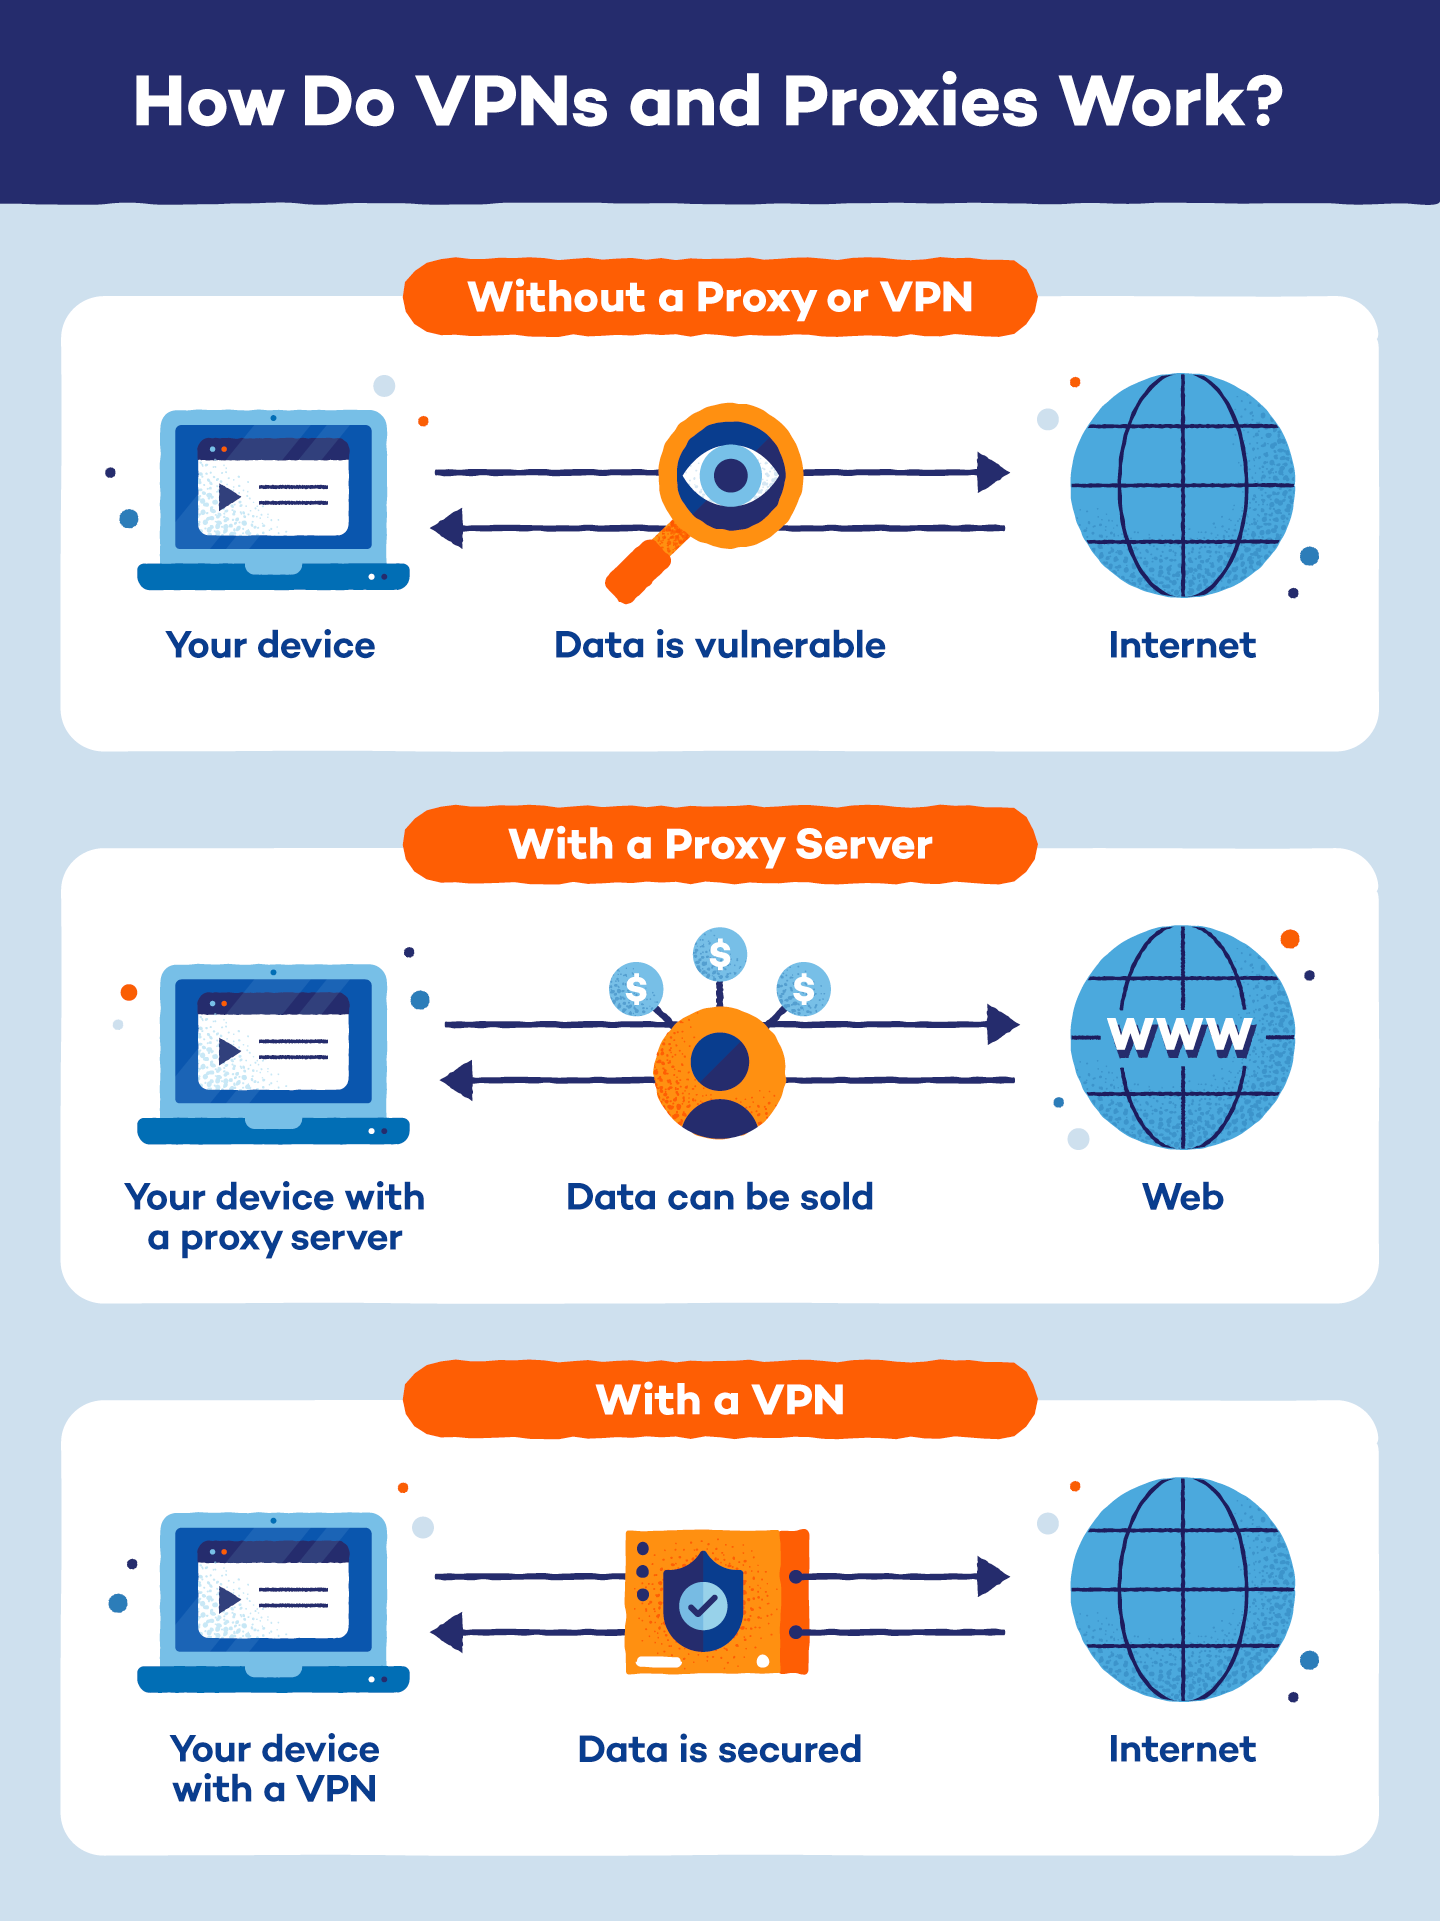 Differences between devices with a proxy vs VPN and how each works